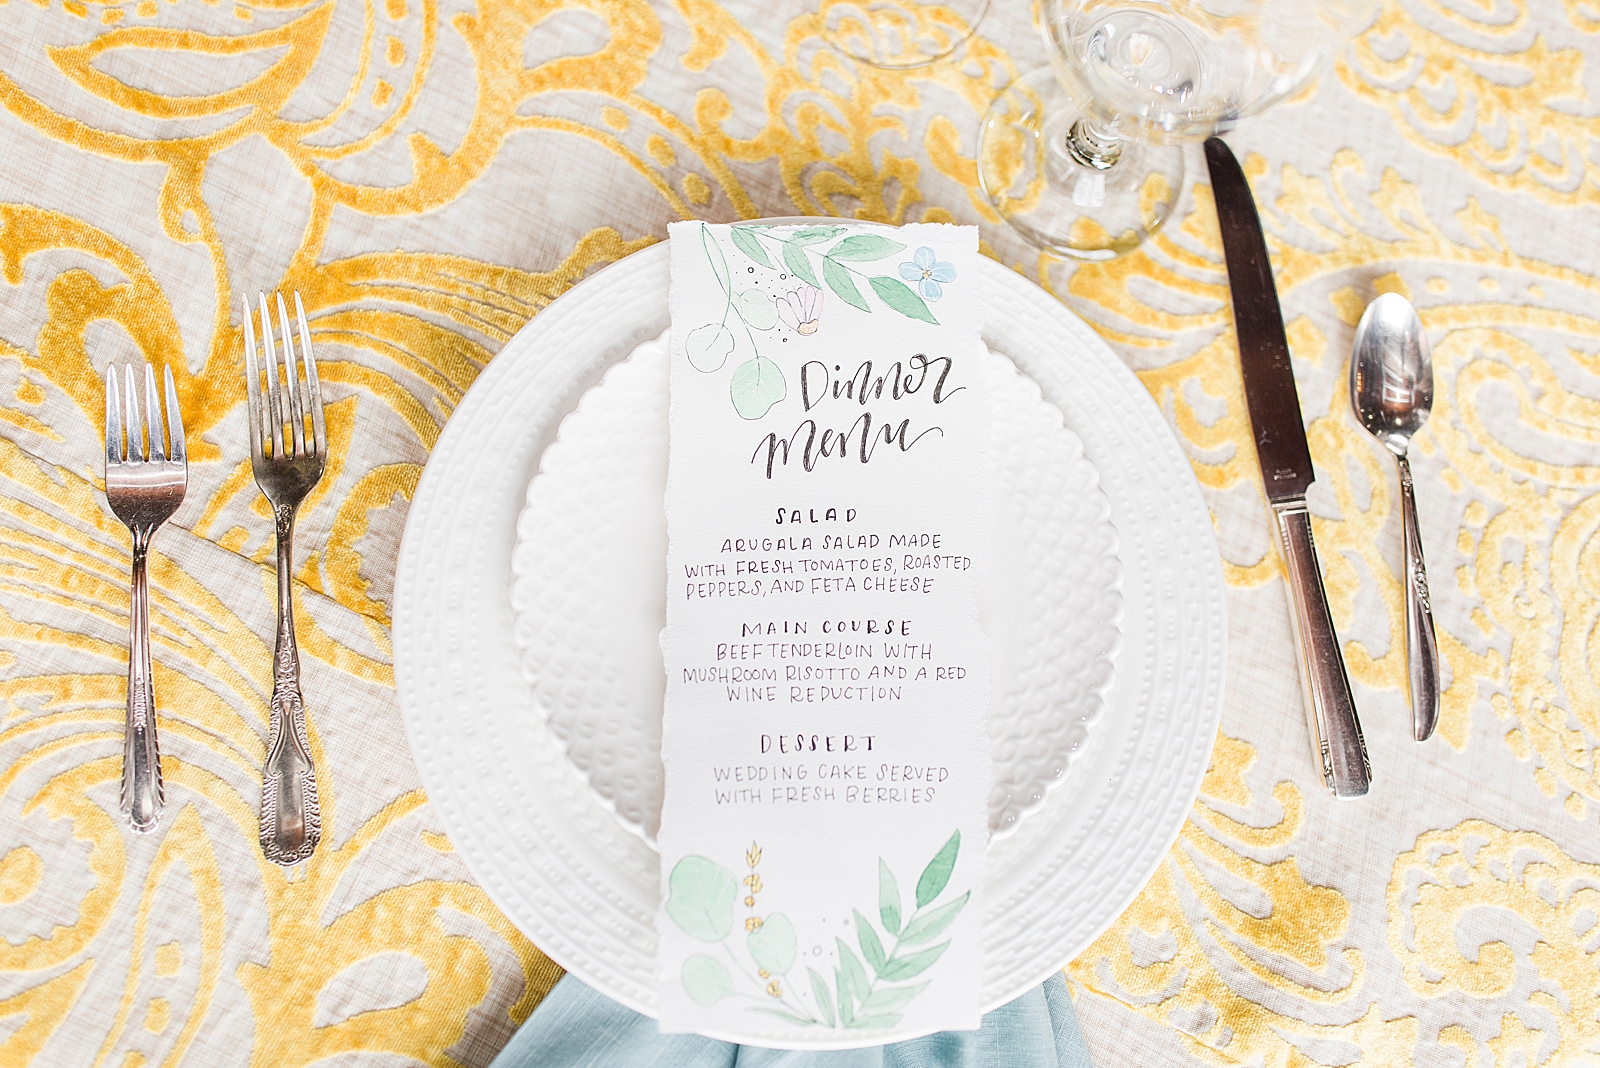 Hackney Warehouse Wedding Reception table details with yellow table cloth blue napkin and dinner menu on white plates Photo